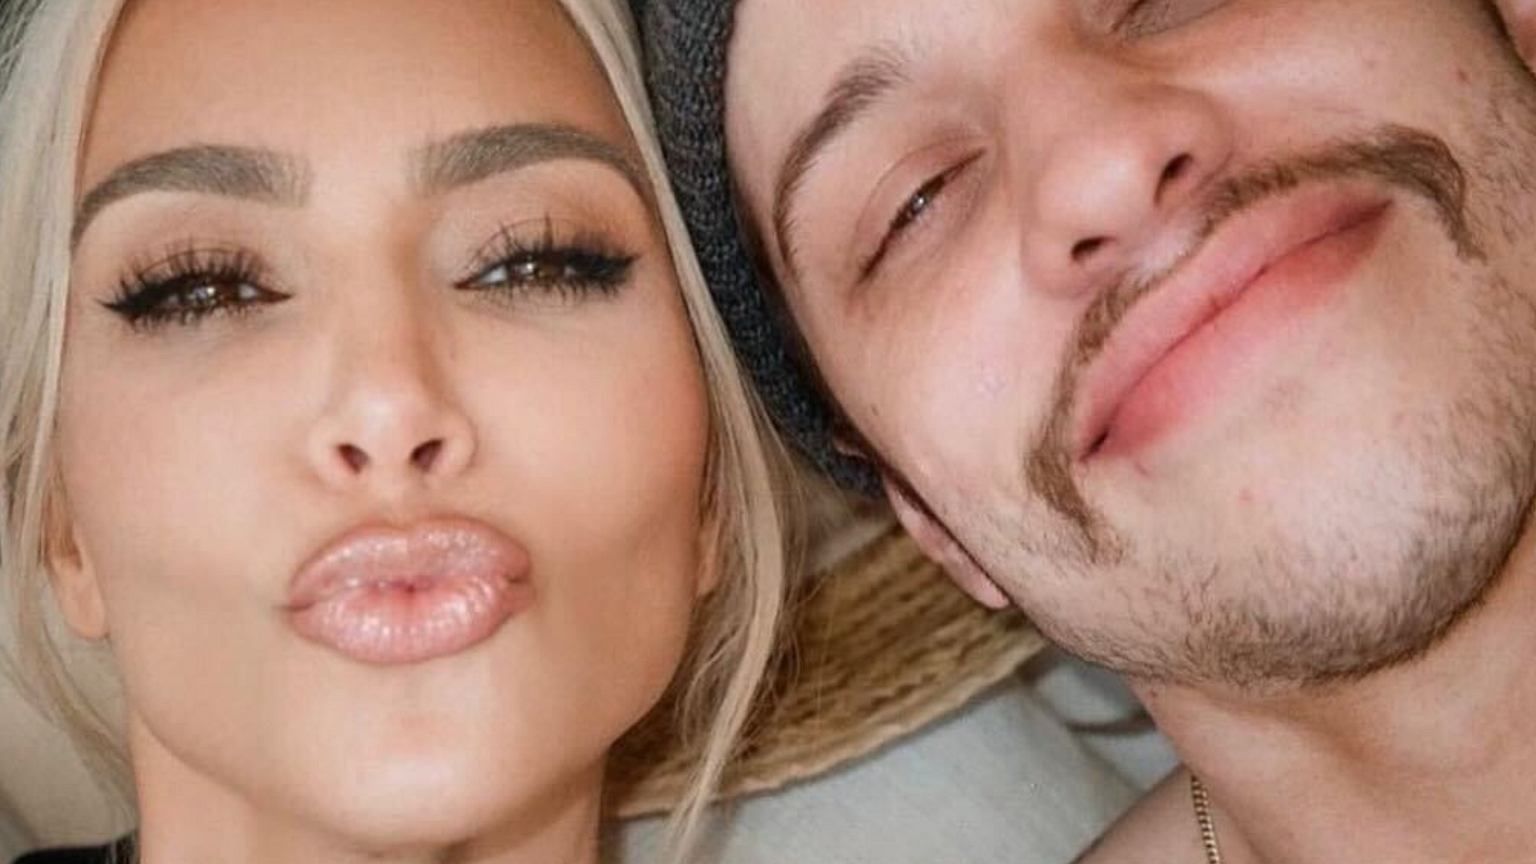 Why Kim Kardashian Broke Up With Pete Davidson - The Reason Behind Their Unexpected Separation